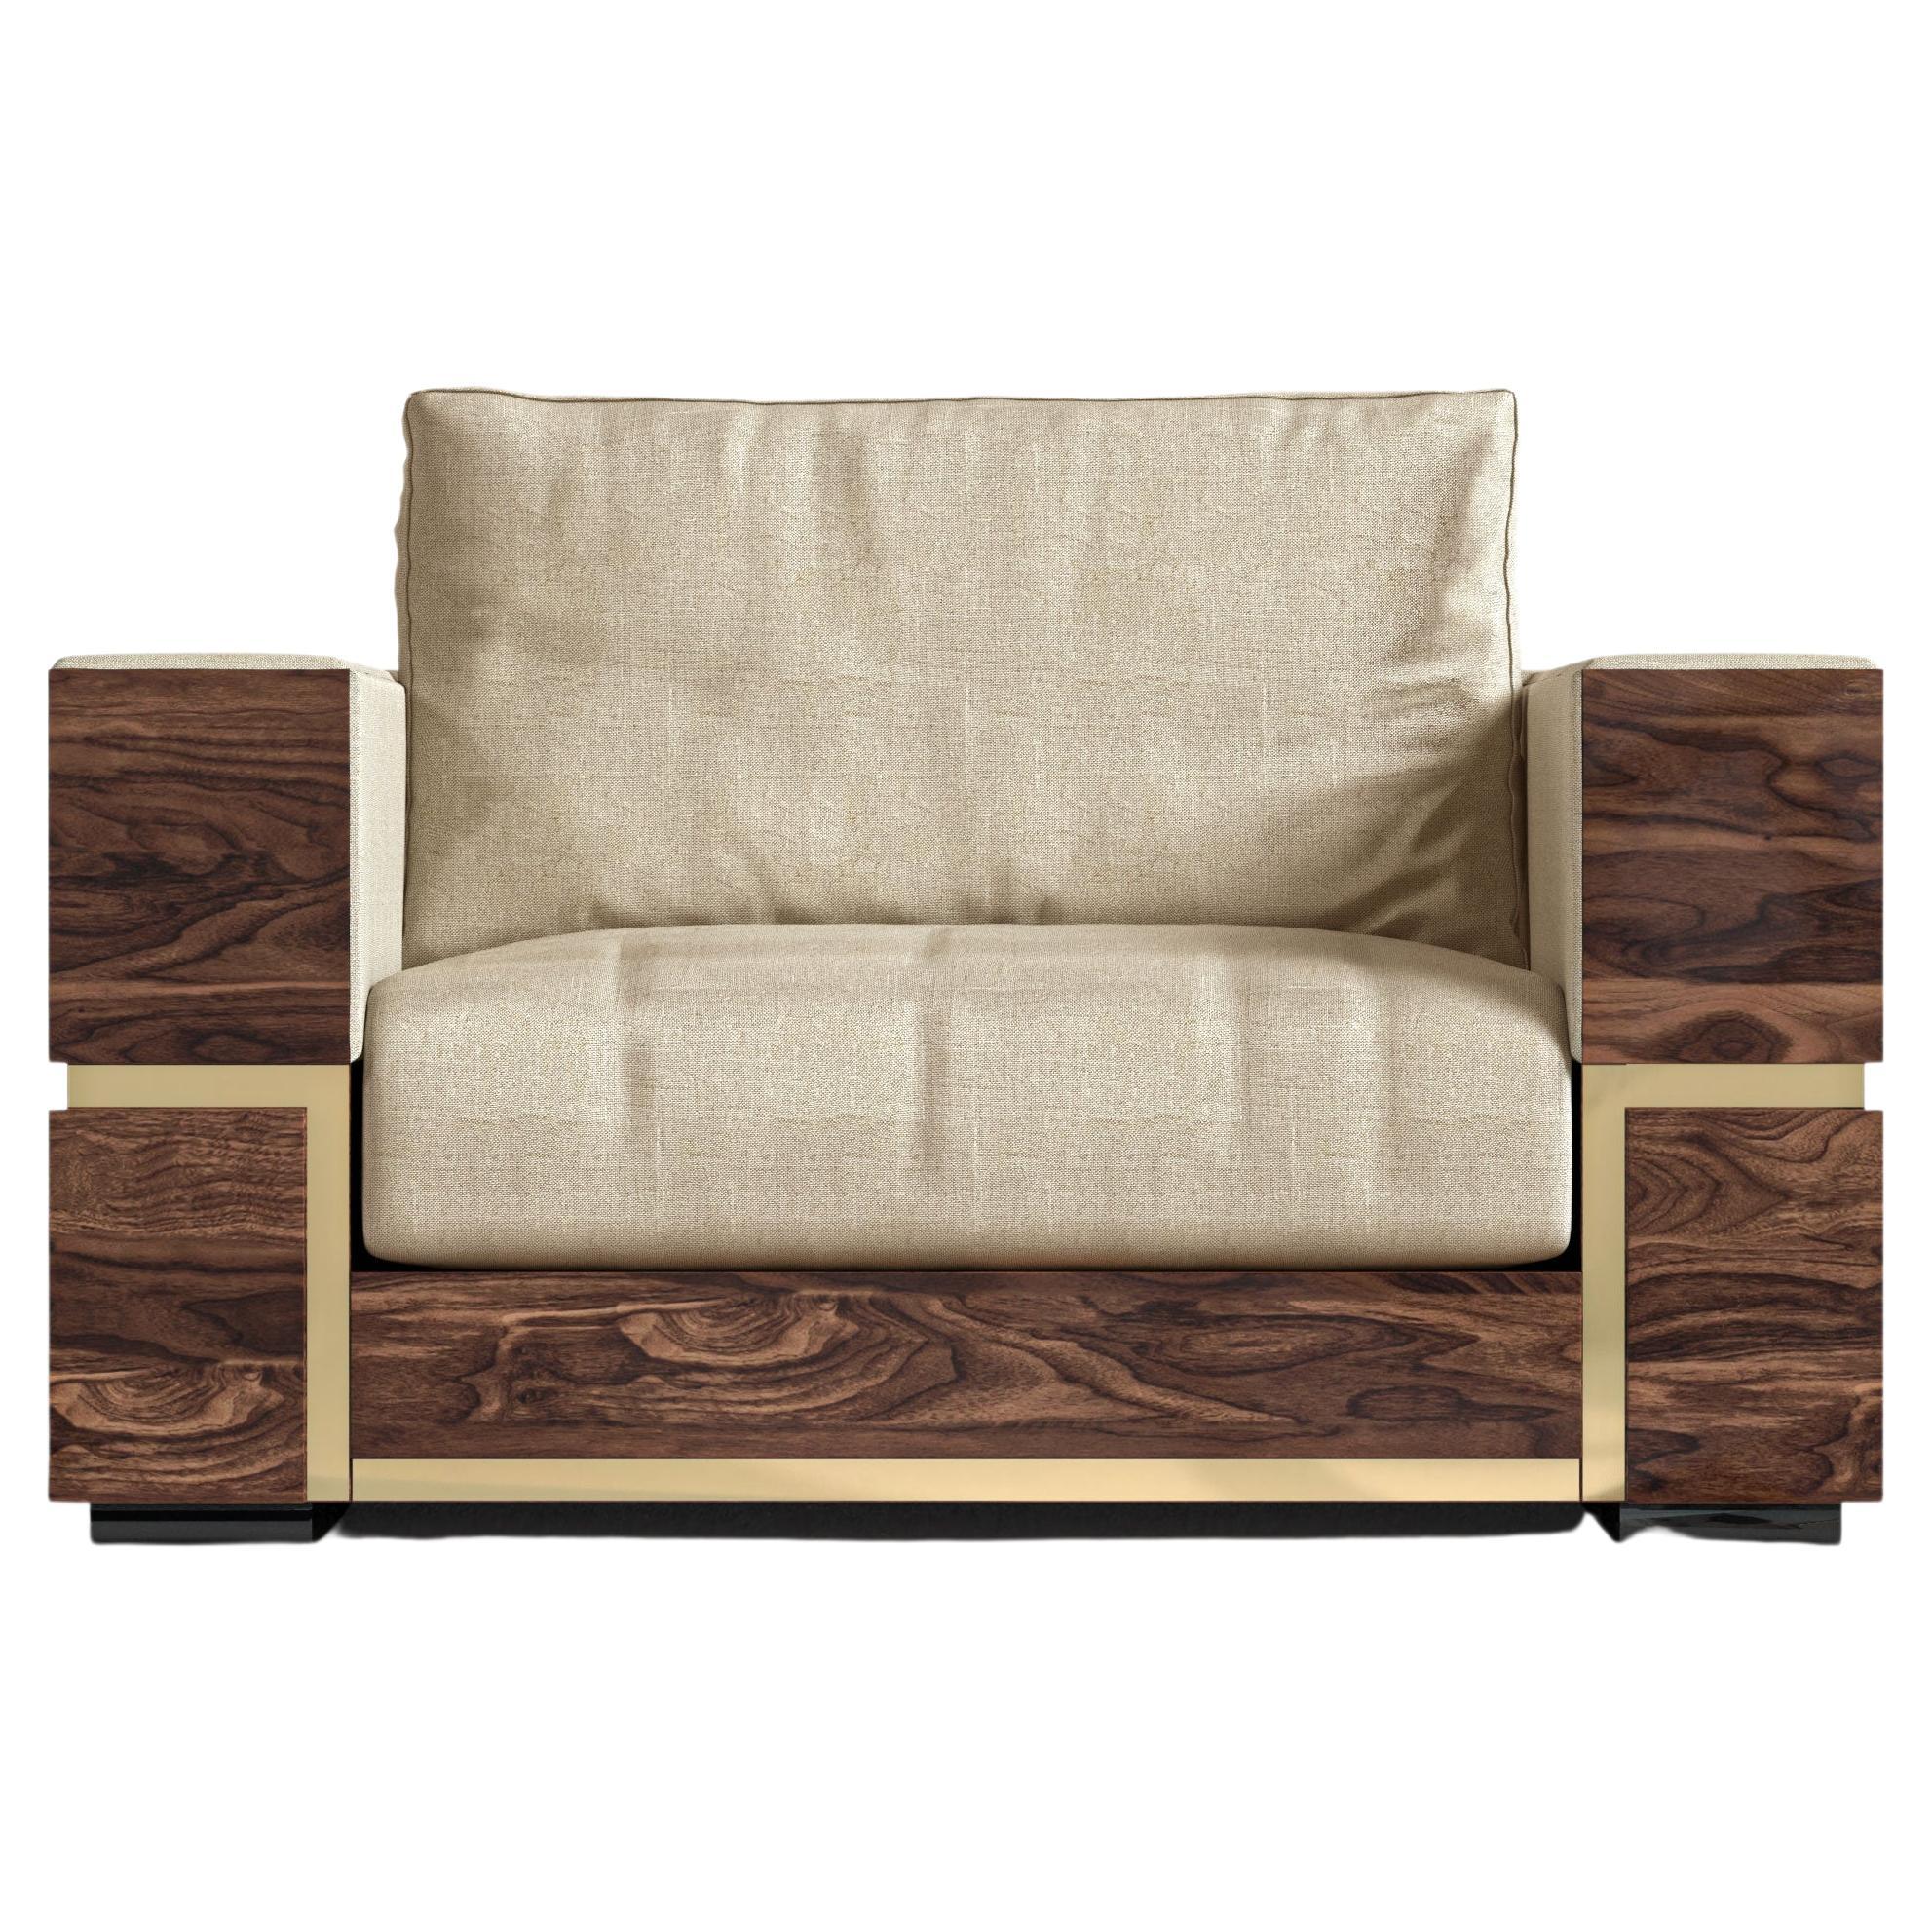 Balteus Sofa

Exuding stylish form and comfort, Balteus is a wide-width piece inspired by modern design. The gorgeous polished bronze is a beautiful contrast to the customizable soft fabric upholstery. With the width of the armrests also offering a